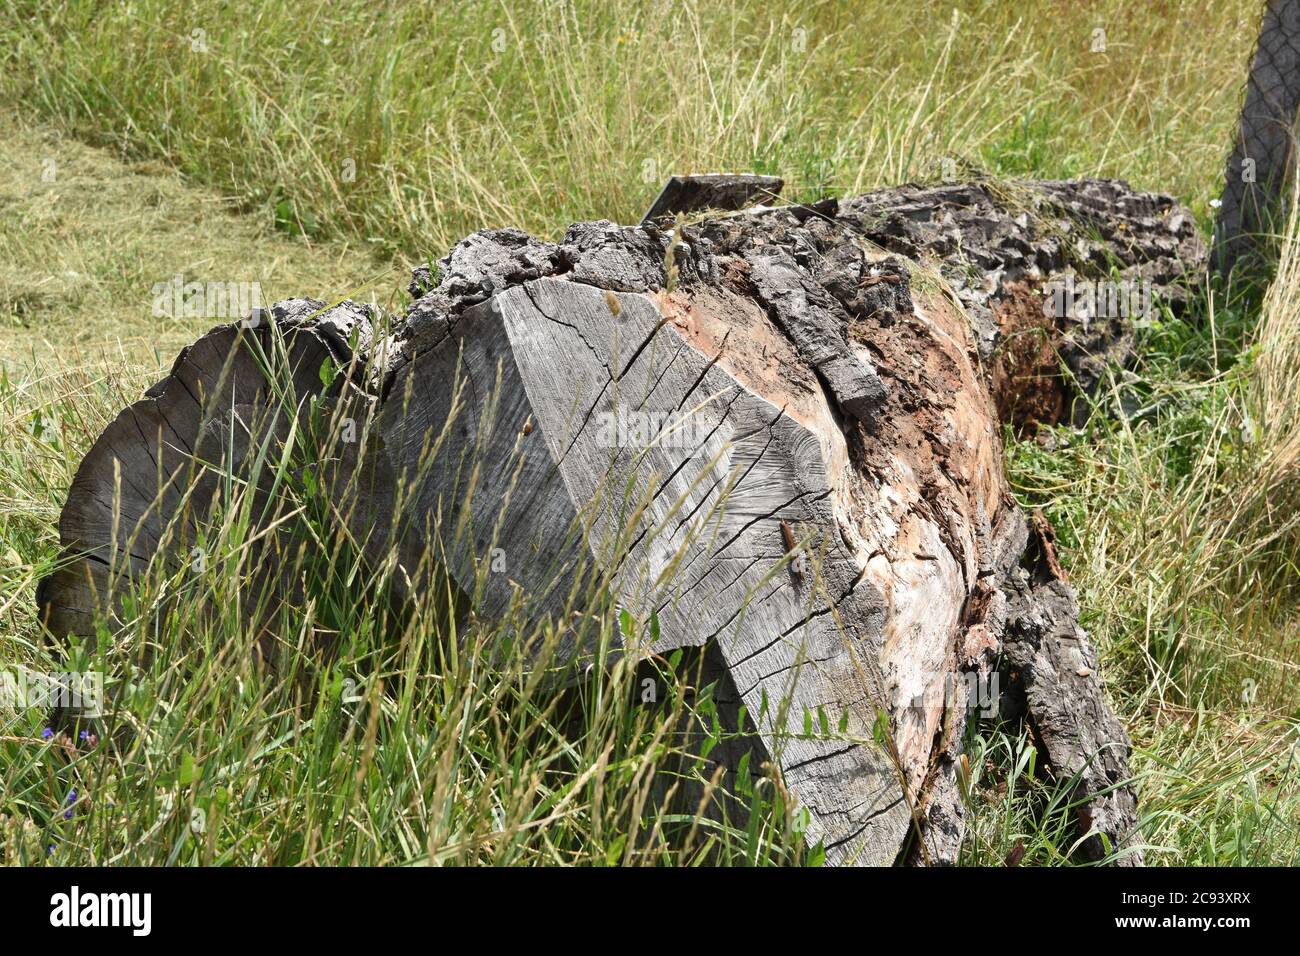 Cut off dried up tree trunk in high yellow and green grass near concrete stake of the chain-link fence during summer. Stock Photo